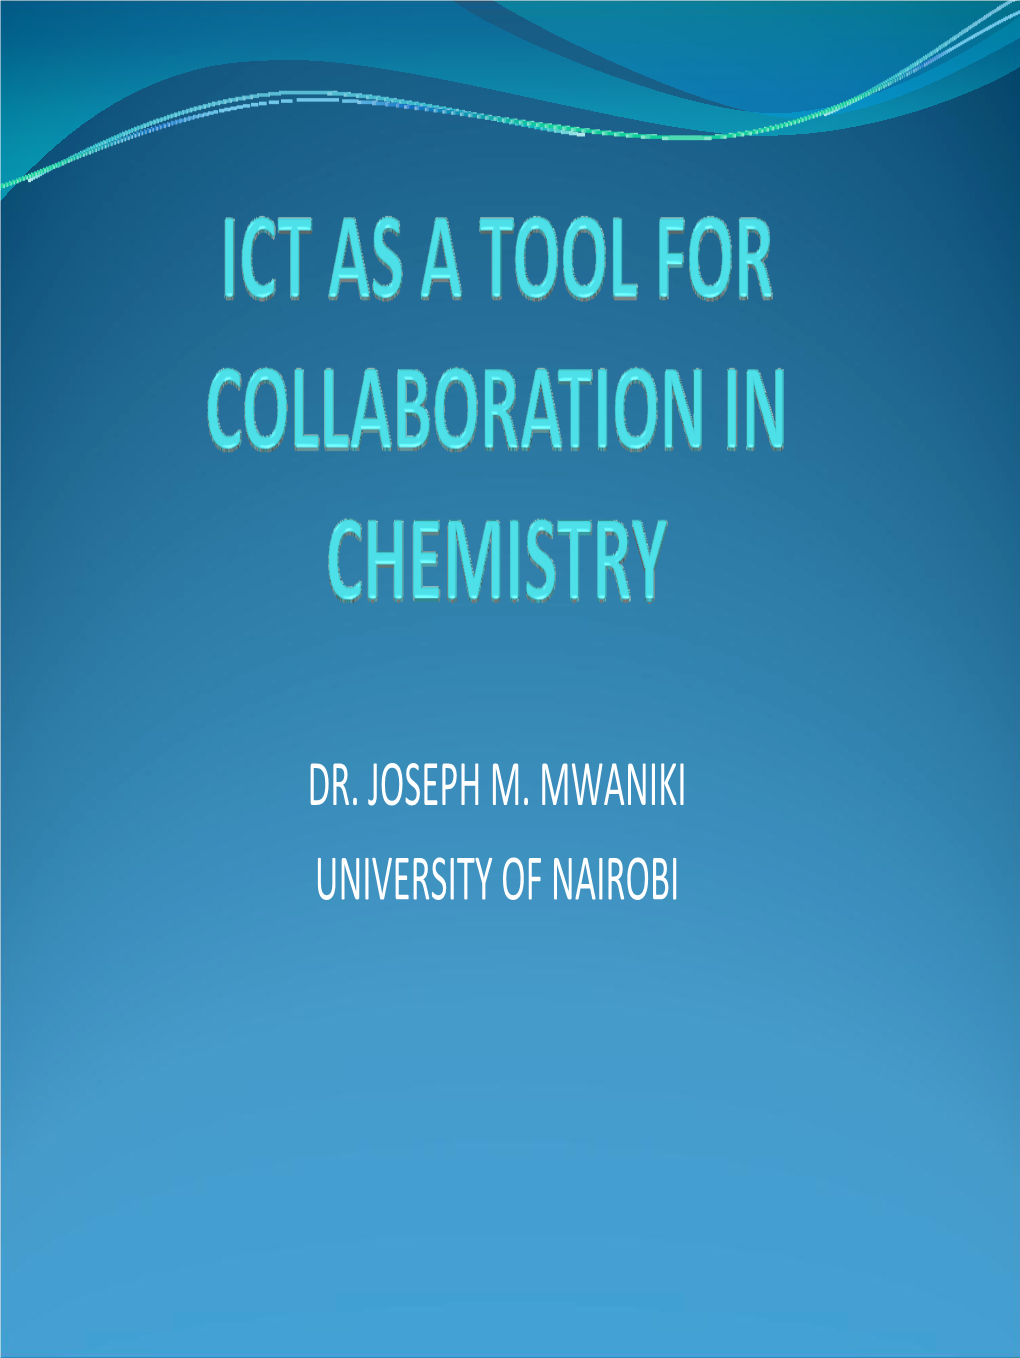 Ict As a Tool for Collaboration in Chemistry